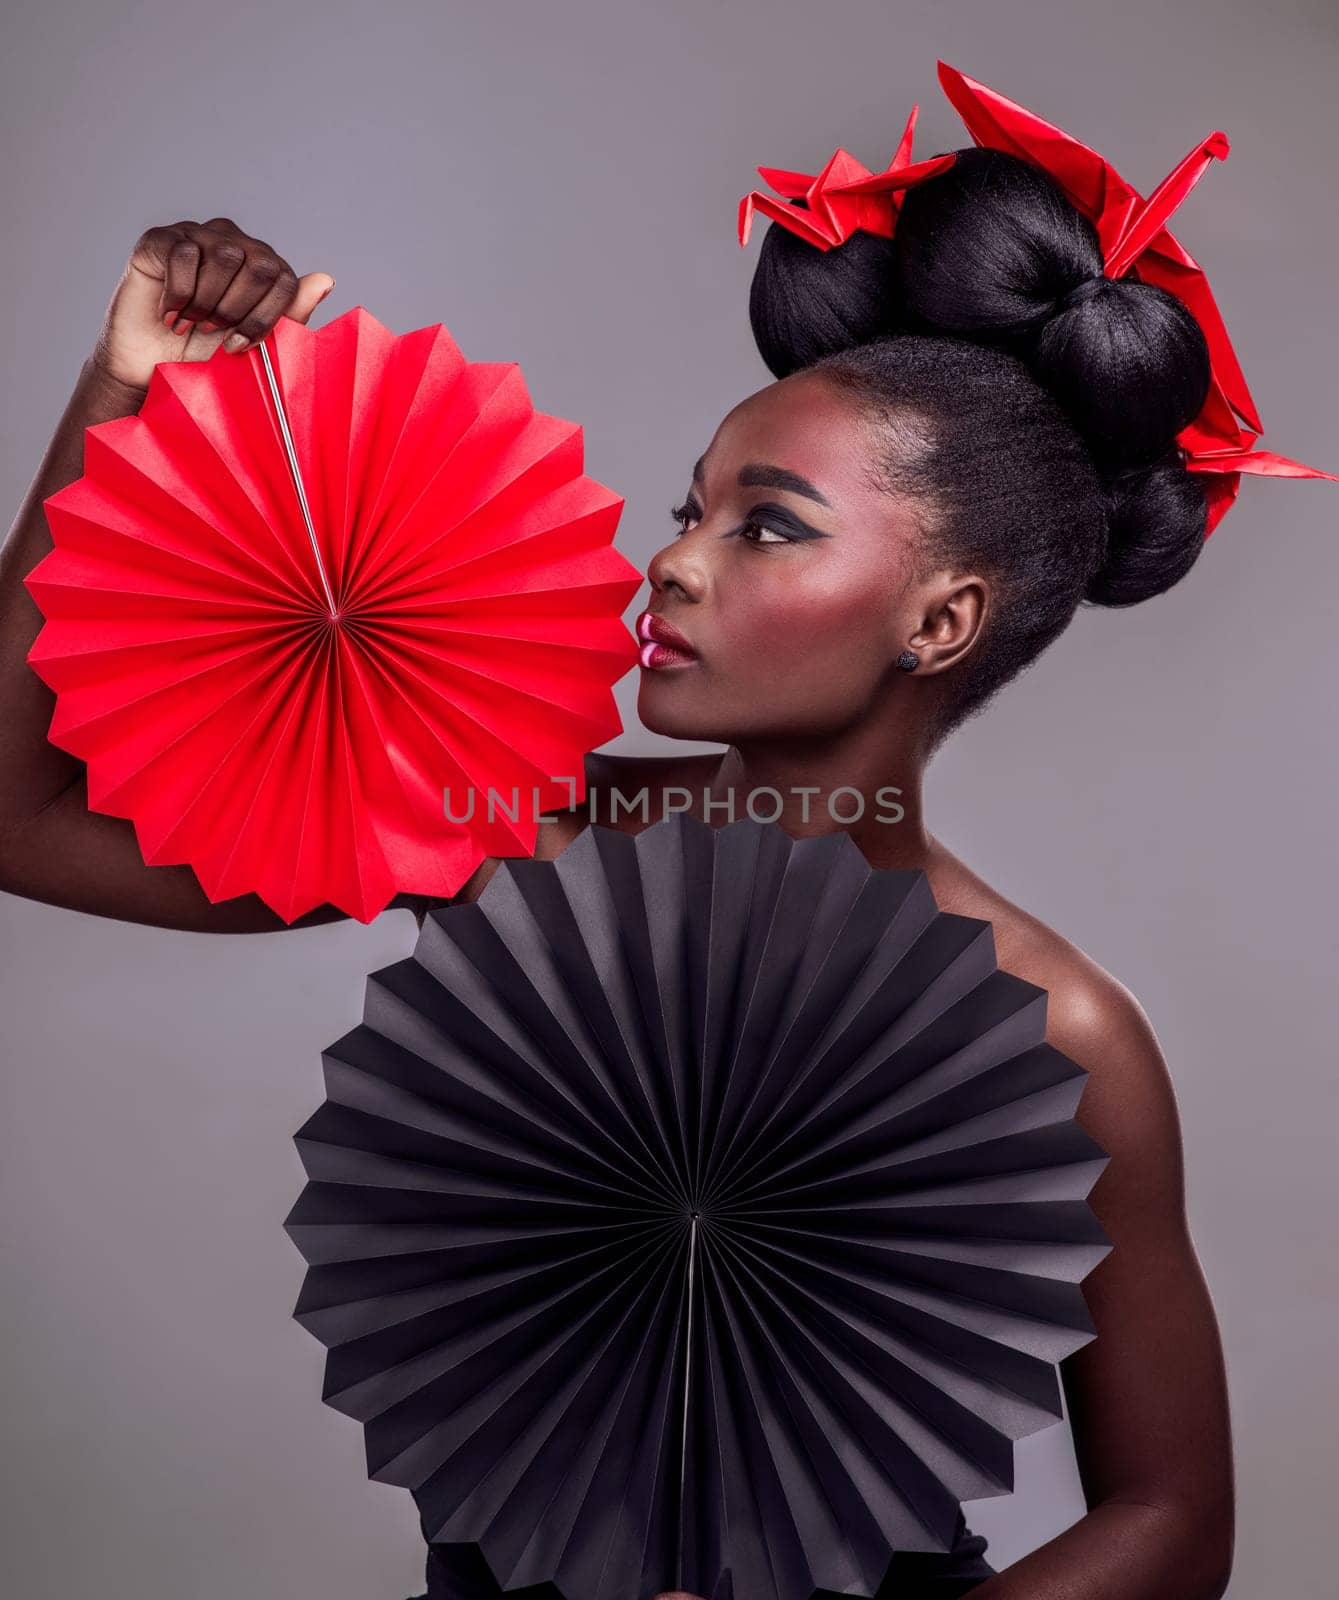 Art, makeup and creative with black woman in studio for origami, beauty and culture. Traditional, cosmetics and paper design with female model and fans on grey background for fashion, retro or color.